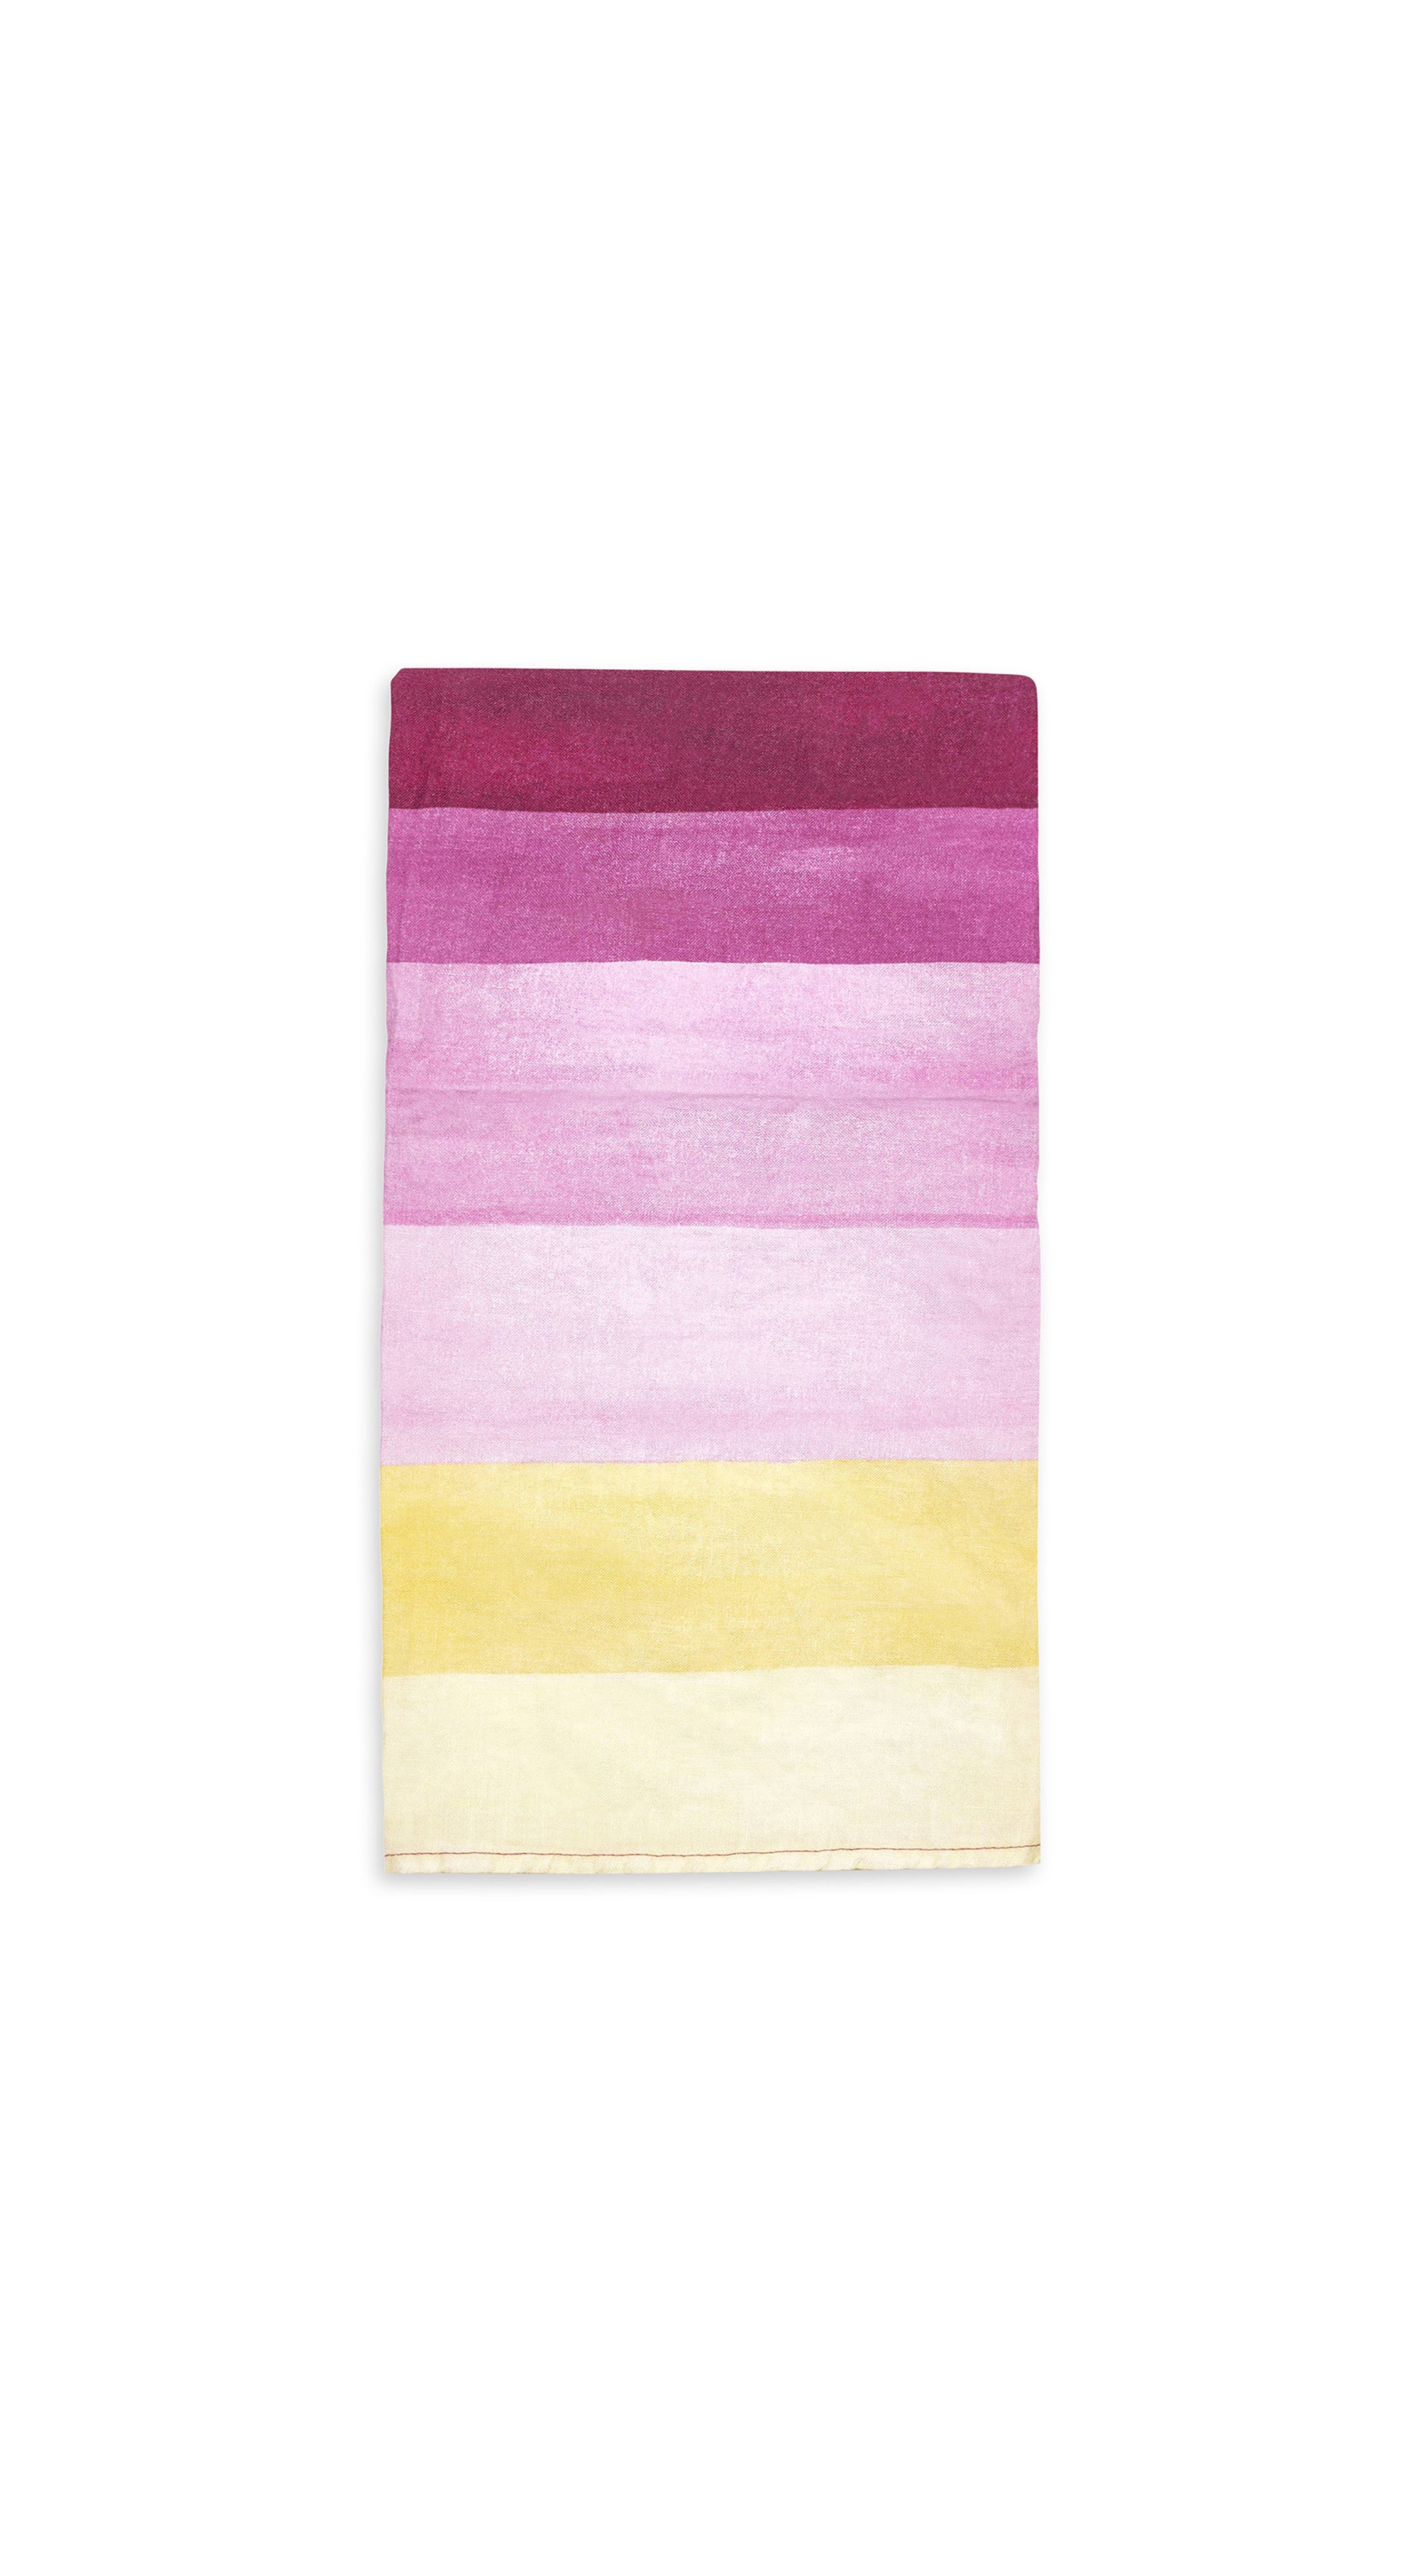 Shades Linen Napkin in Pink & Yellow, 50x50cm